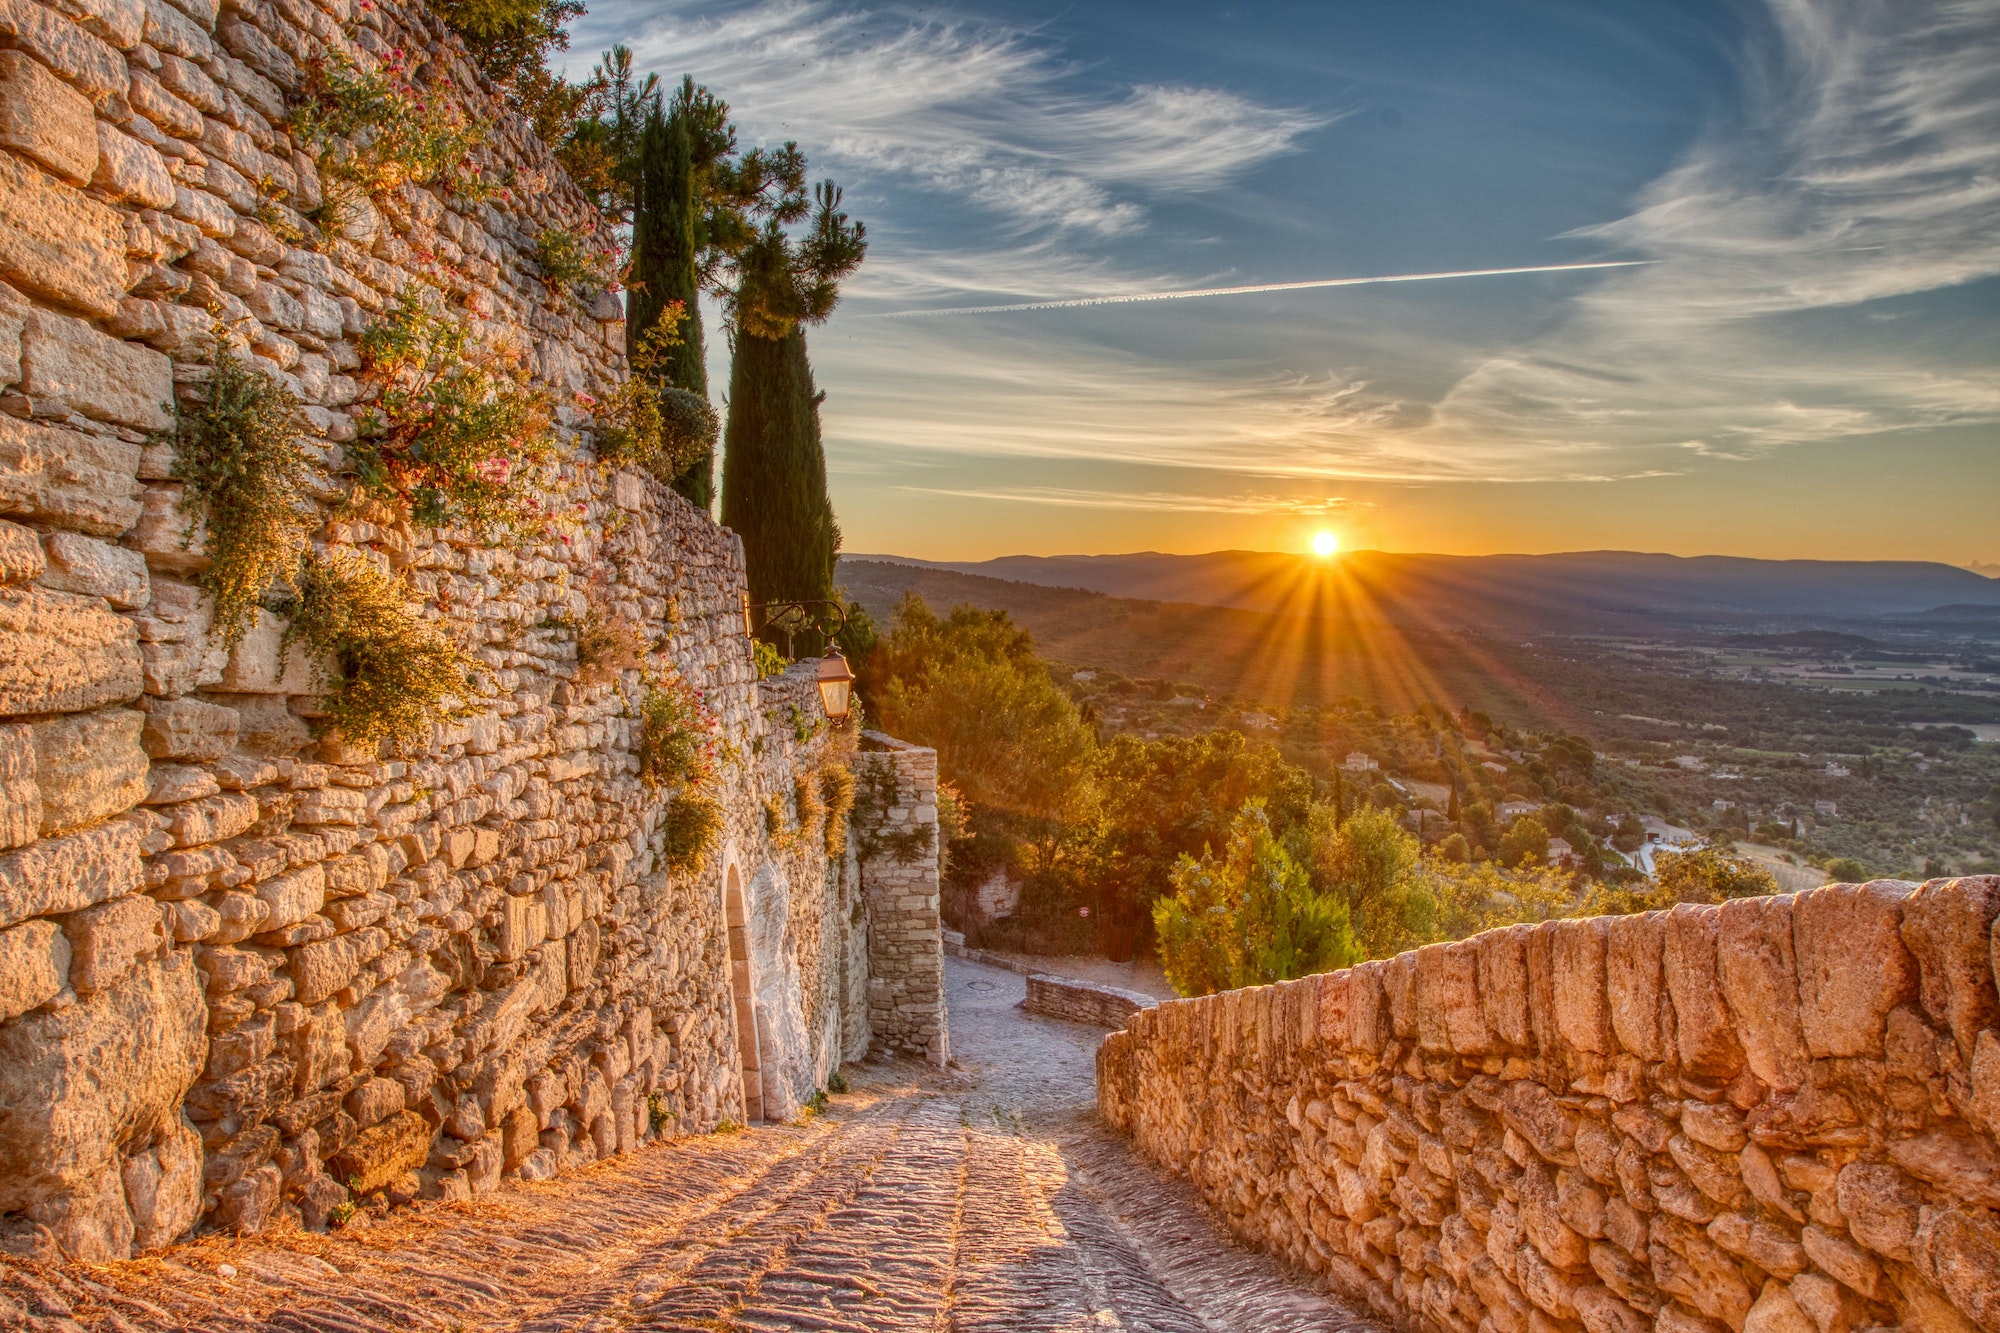 Fascinating view of the sunrise in Gordes, France